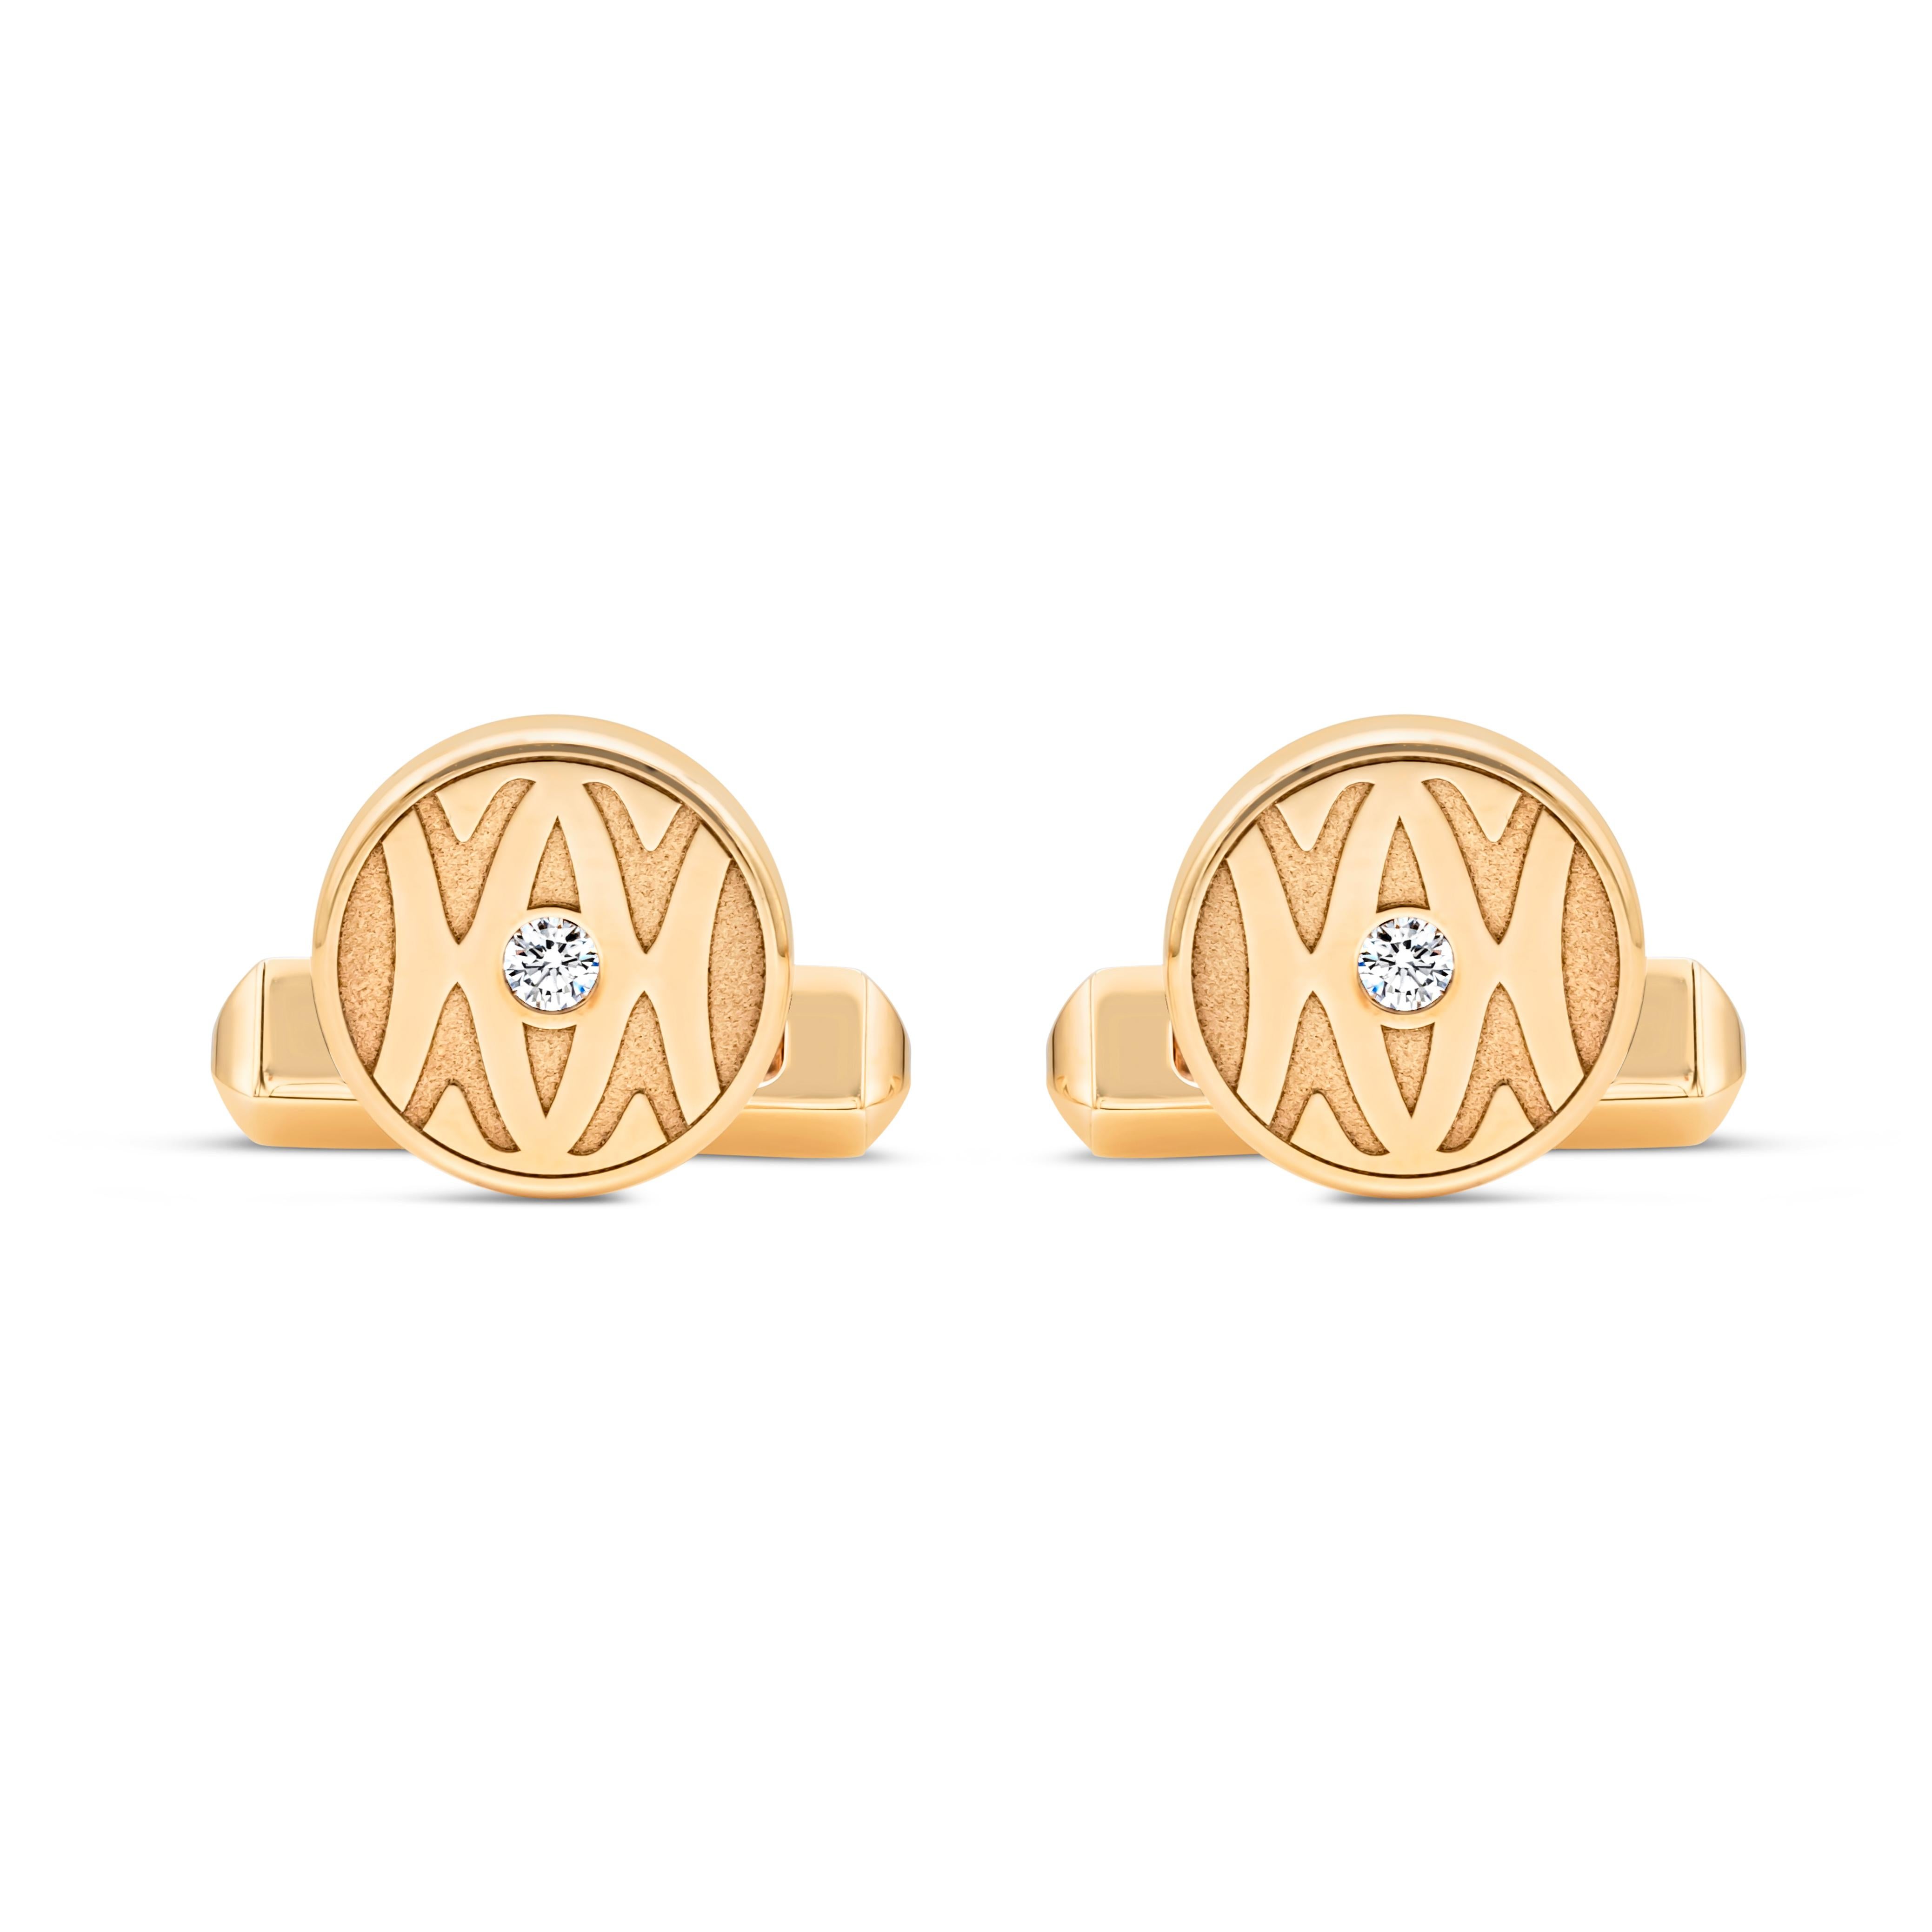 A great looking pair of cufflinks showcasing a brilliant round cut diamonds weighing 0.14 carats total, E color and VS1+  in clarity set in the middle of a 18k yellow gold round cufflink. Whale back design and Comes with original receipt, box and